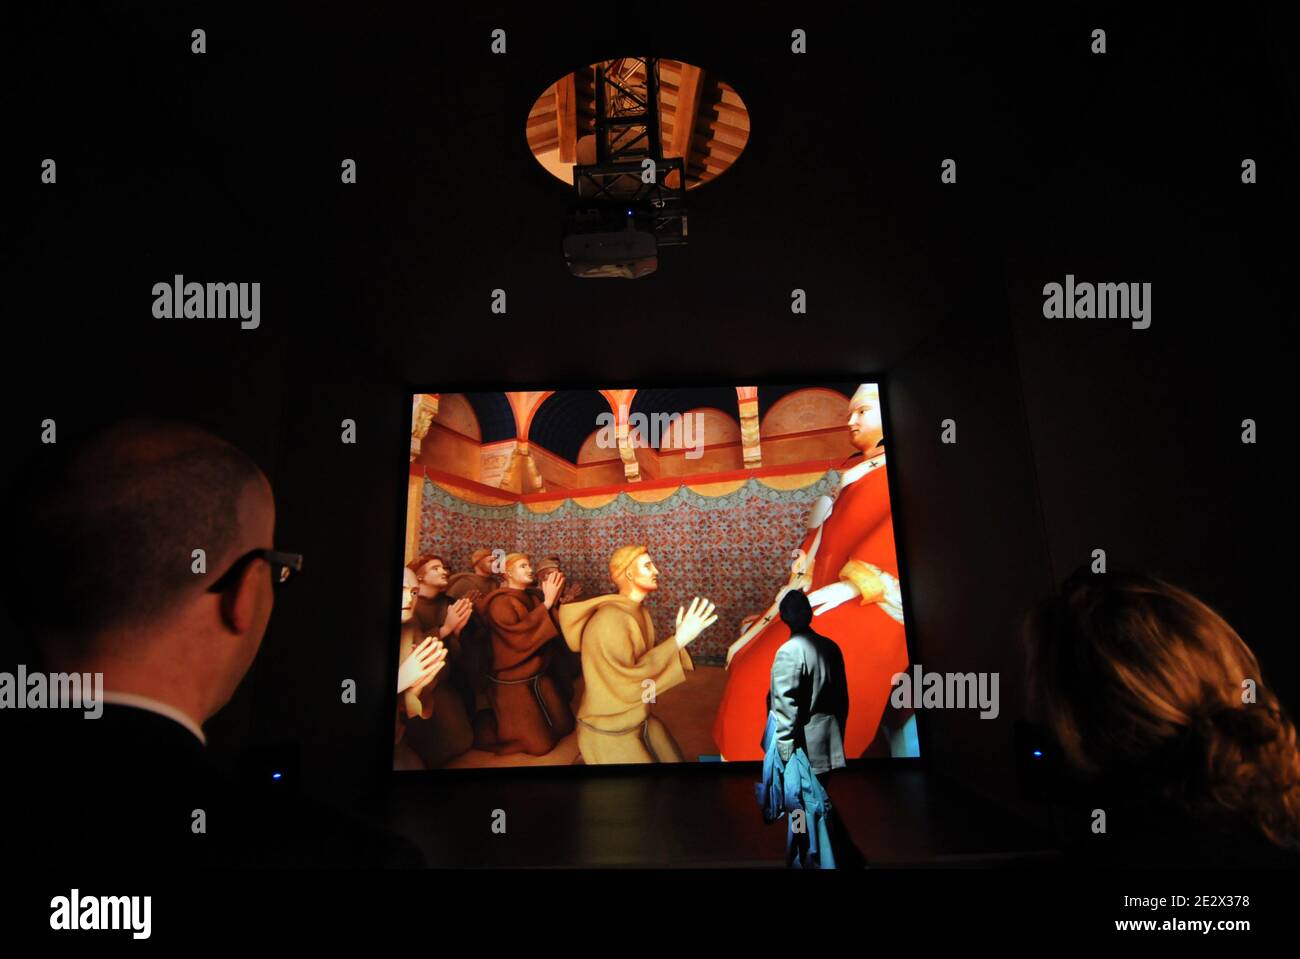 A section of the exhibition allows visitors to 'enter' the fresco.The poster image of the iniziative, showing Pope Innocent III officialy approving the Rule of St Francis, has been transformed into a full-scale three-dimensional installation.The life-sized scene depicts animated characters, including the pontiff welcoming the saint and his followers, which react to the movements of visitors 'entering' the image. 'The Colours of Giotto' : open restoration site and virtual reconstruction in the Basilica of Saint Francis in Assisi, Italy on april 10, 2010. On the 800th anniversary of the foundati Stock Photo